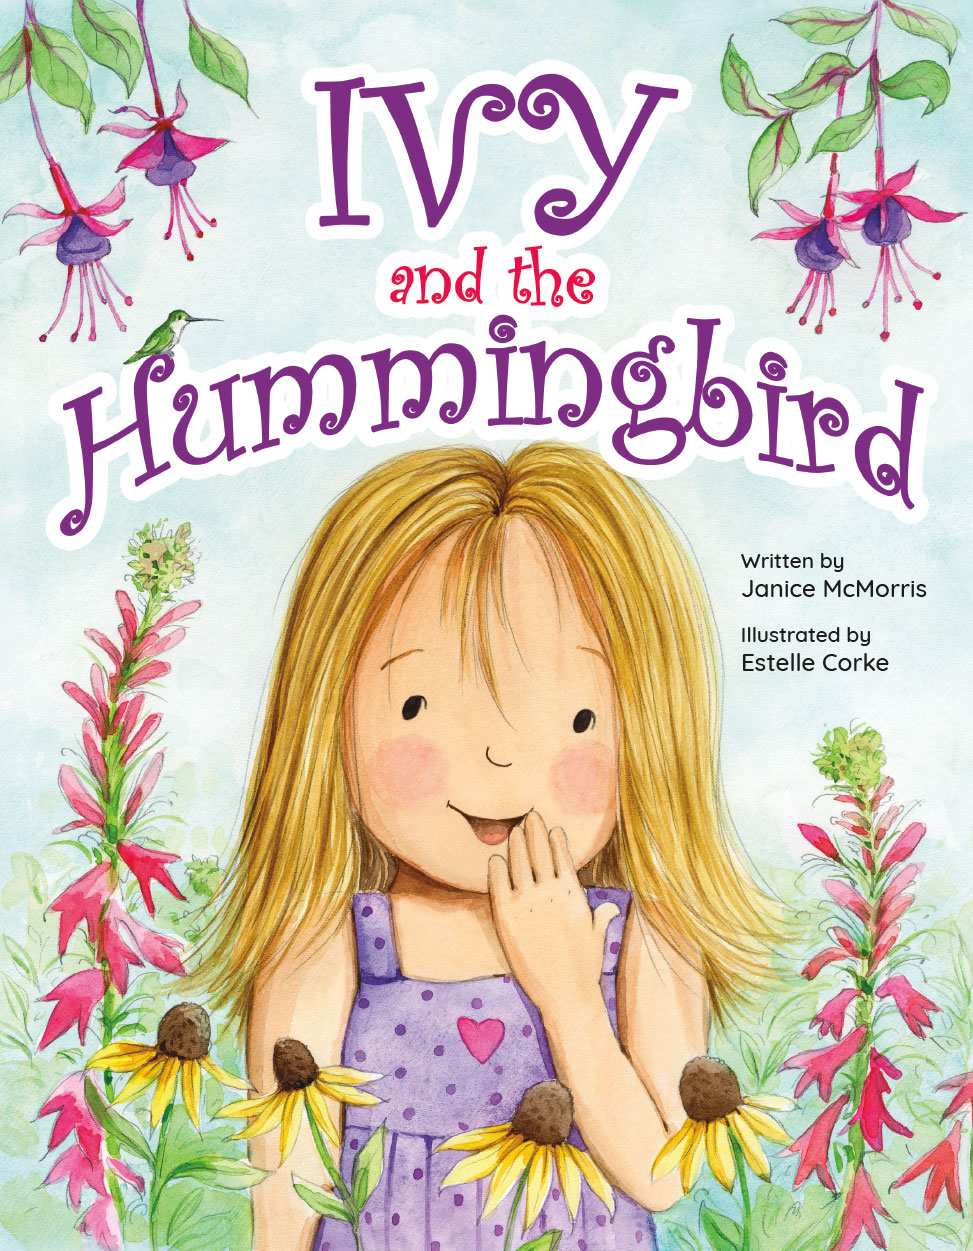 Ivy and the Hummingbird by Janice McMorris Book Cover